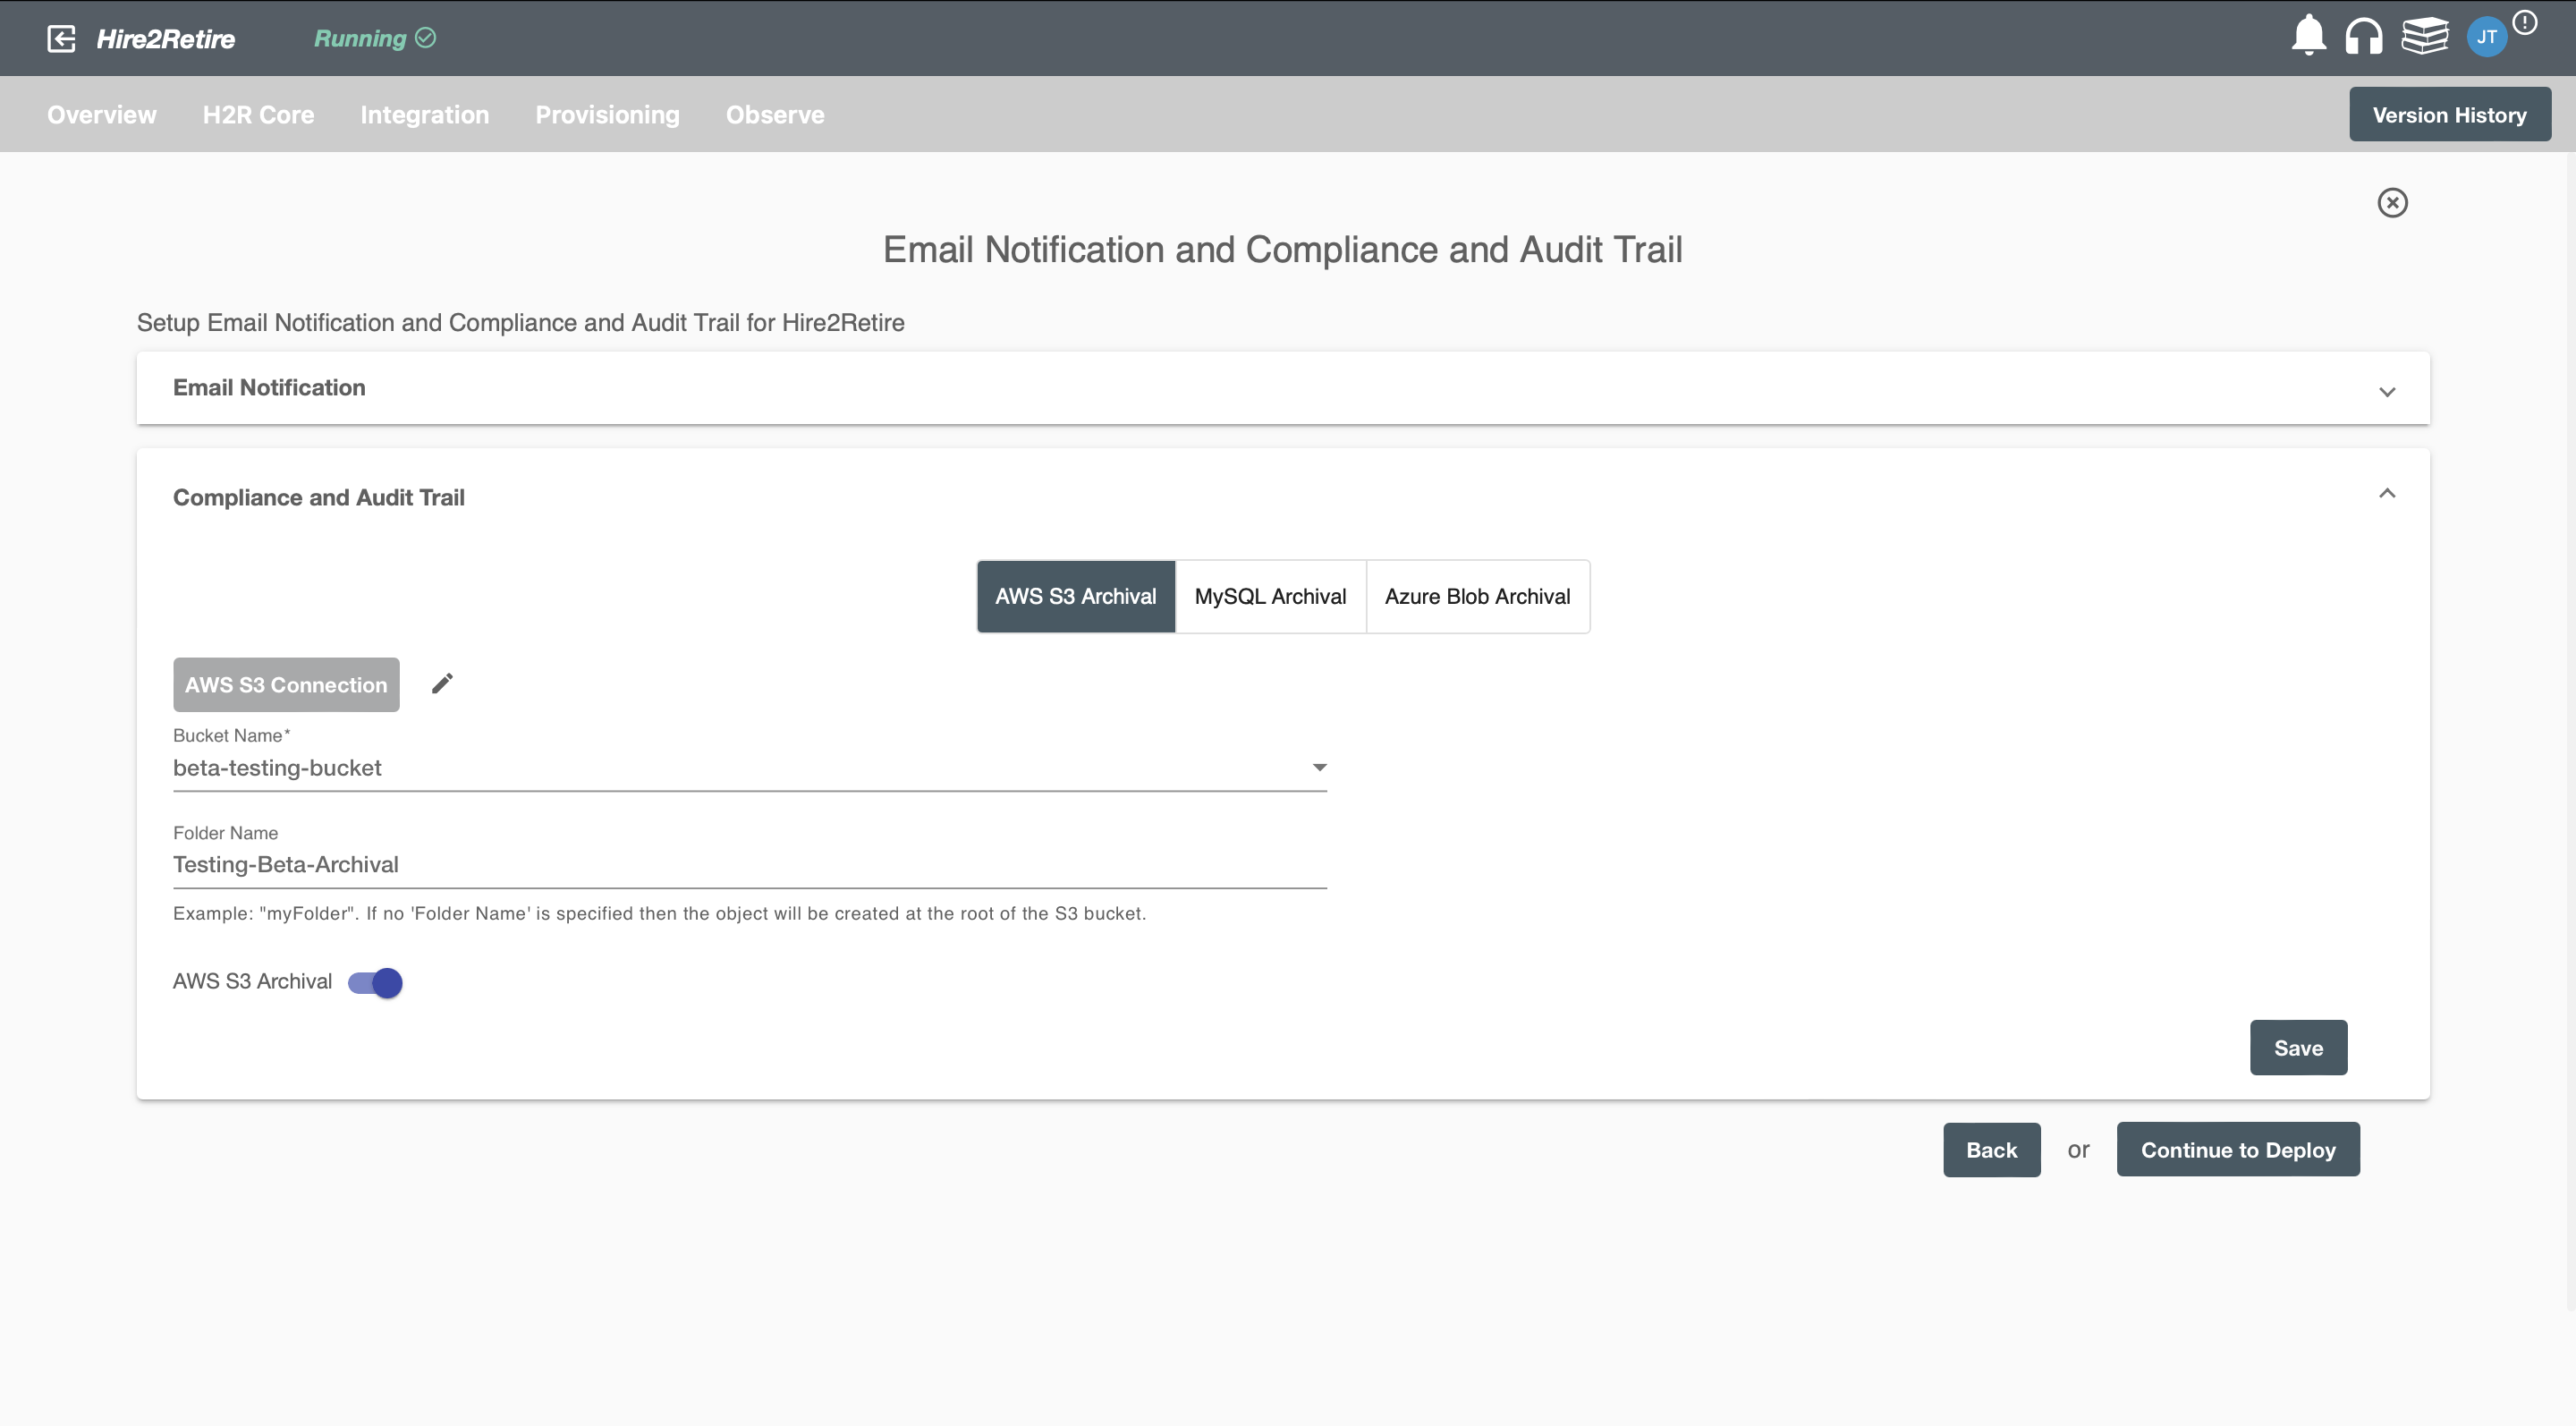 AWS S3 Compliance and Audit Trail setting on flow deployment